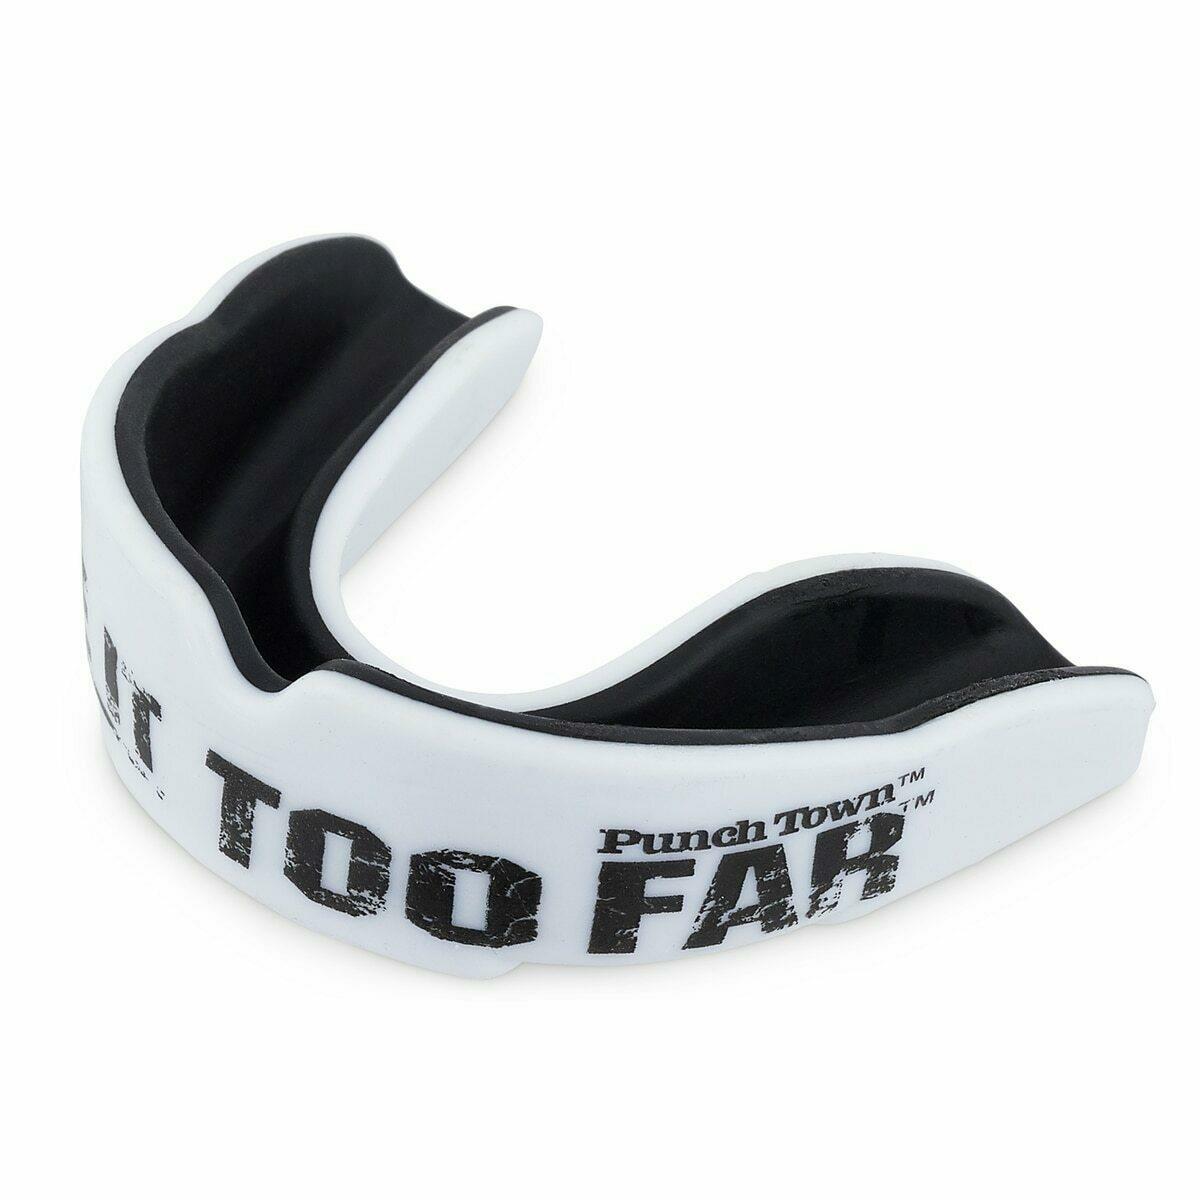 PunchTown Grin Reaper Mouth Guard White PT-0037-WB